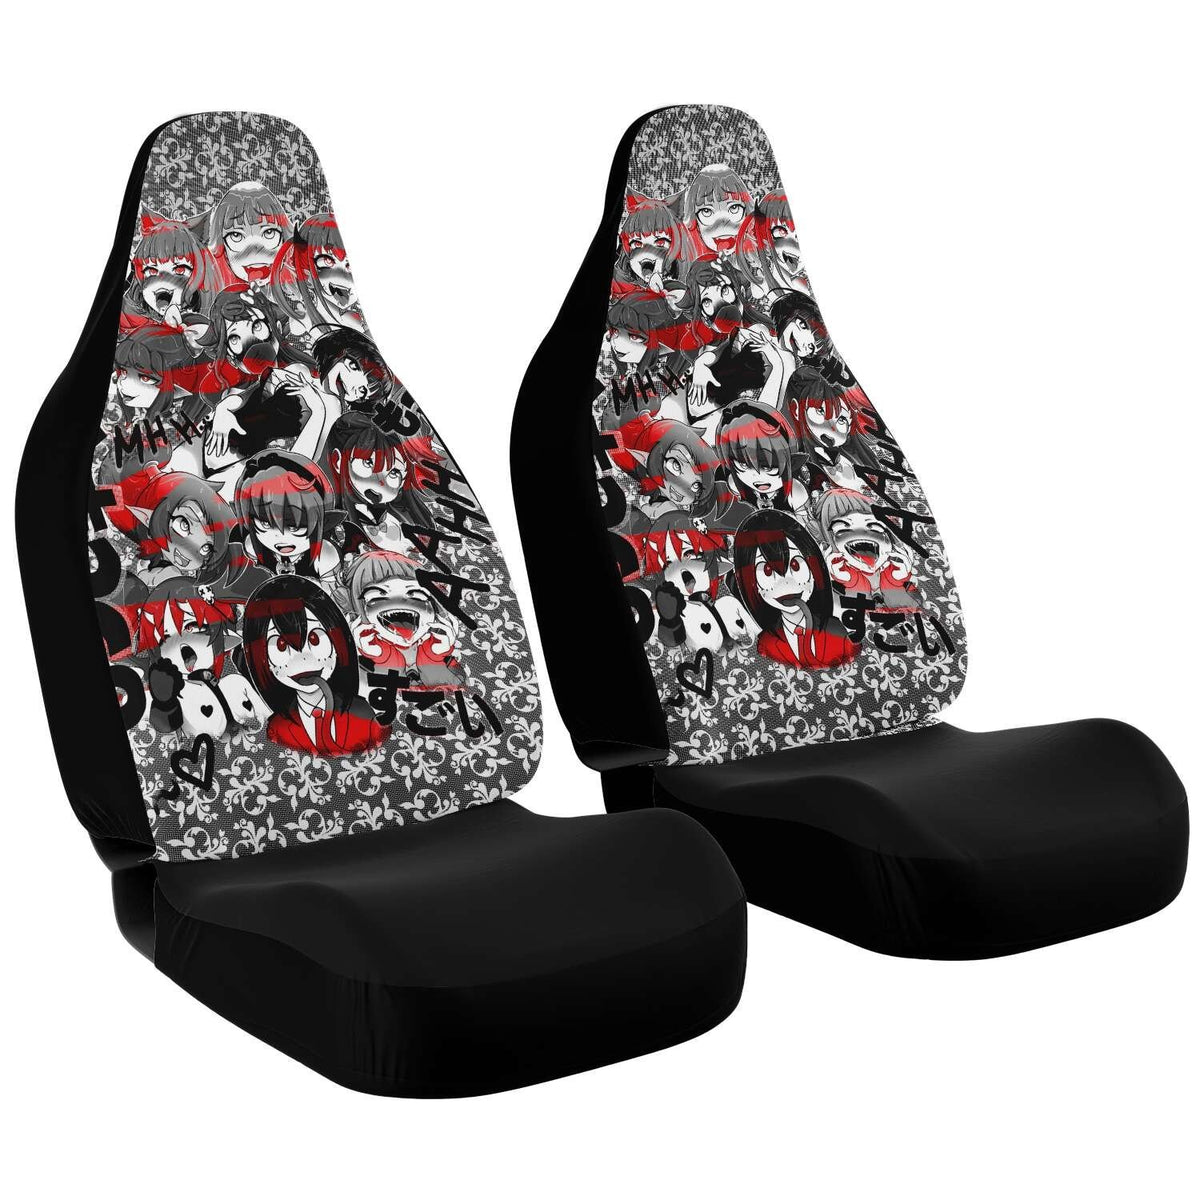 Black and White Manga Comic Car Seat Cover Car Seat Covers - Etsy